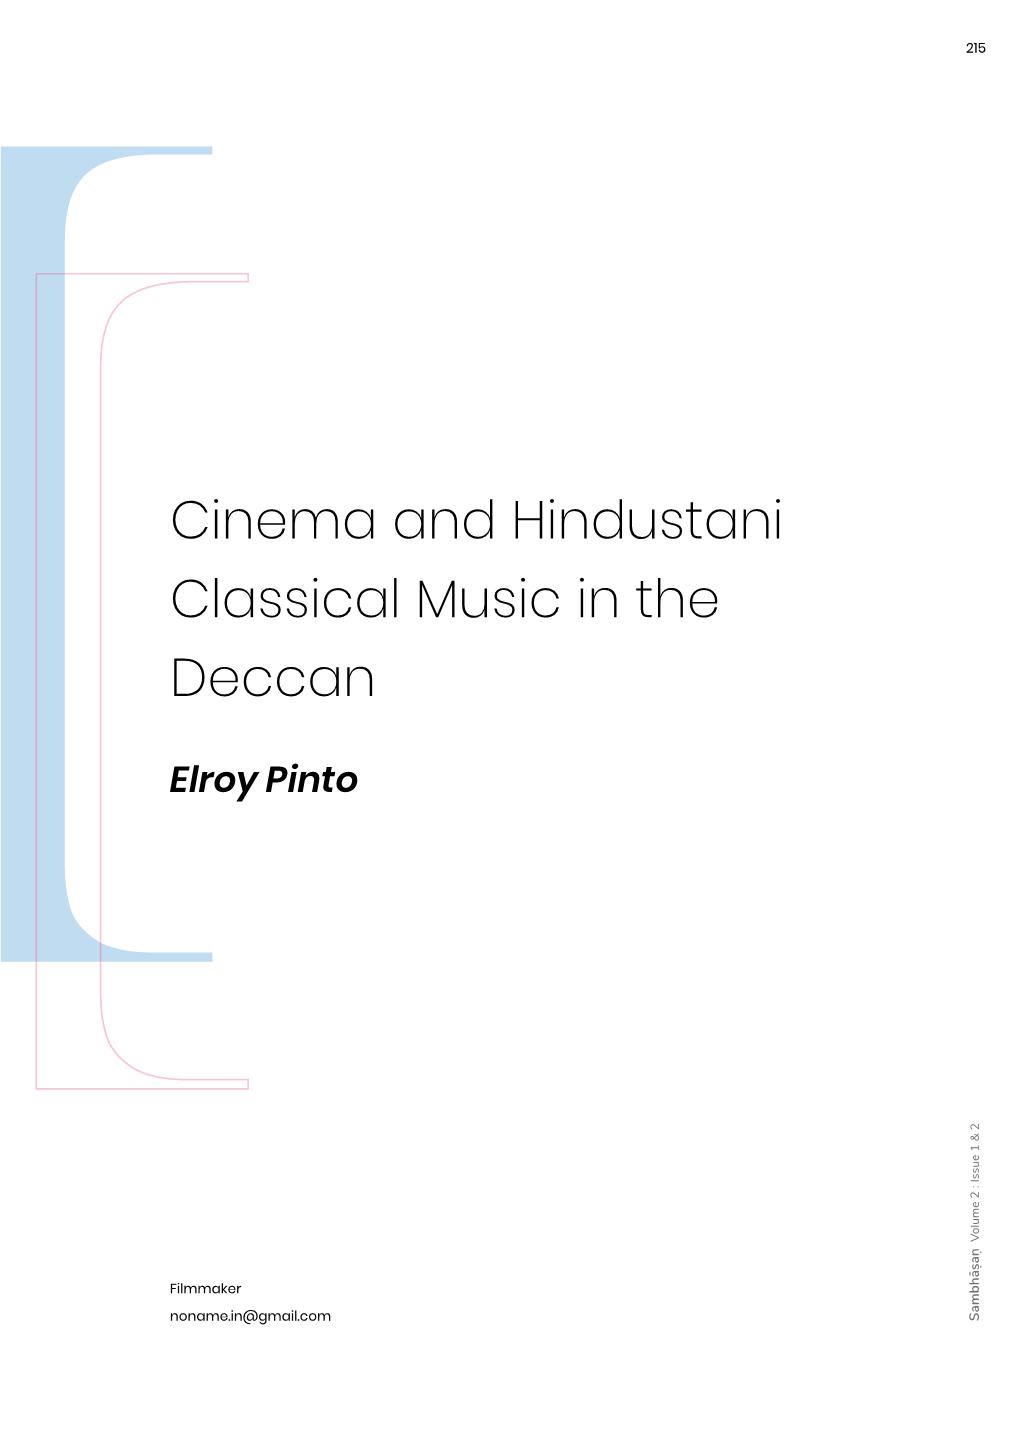 Cinema and Hindustani Classical Music in the Deccan